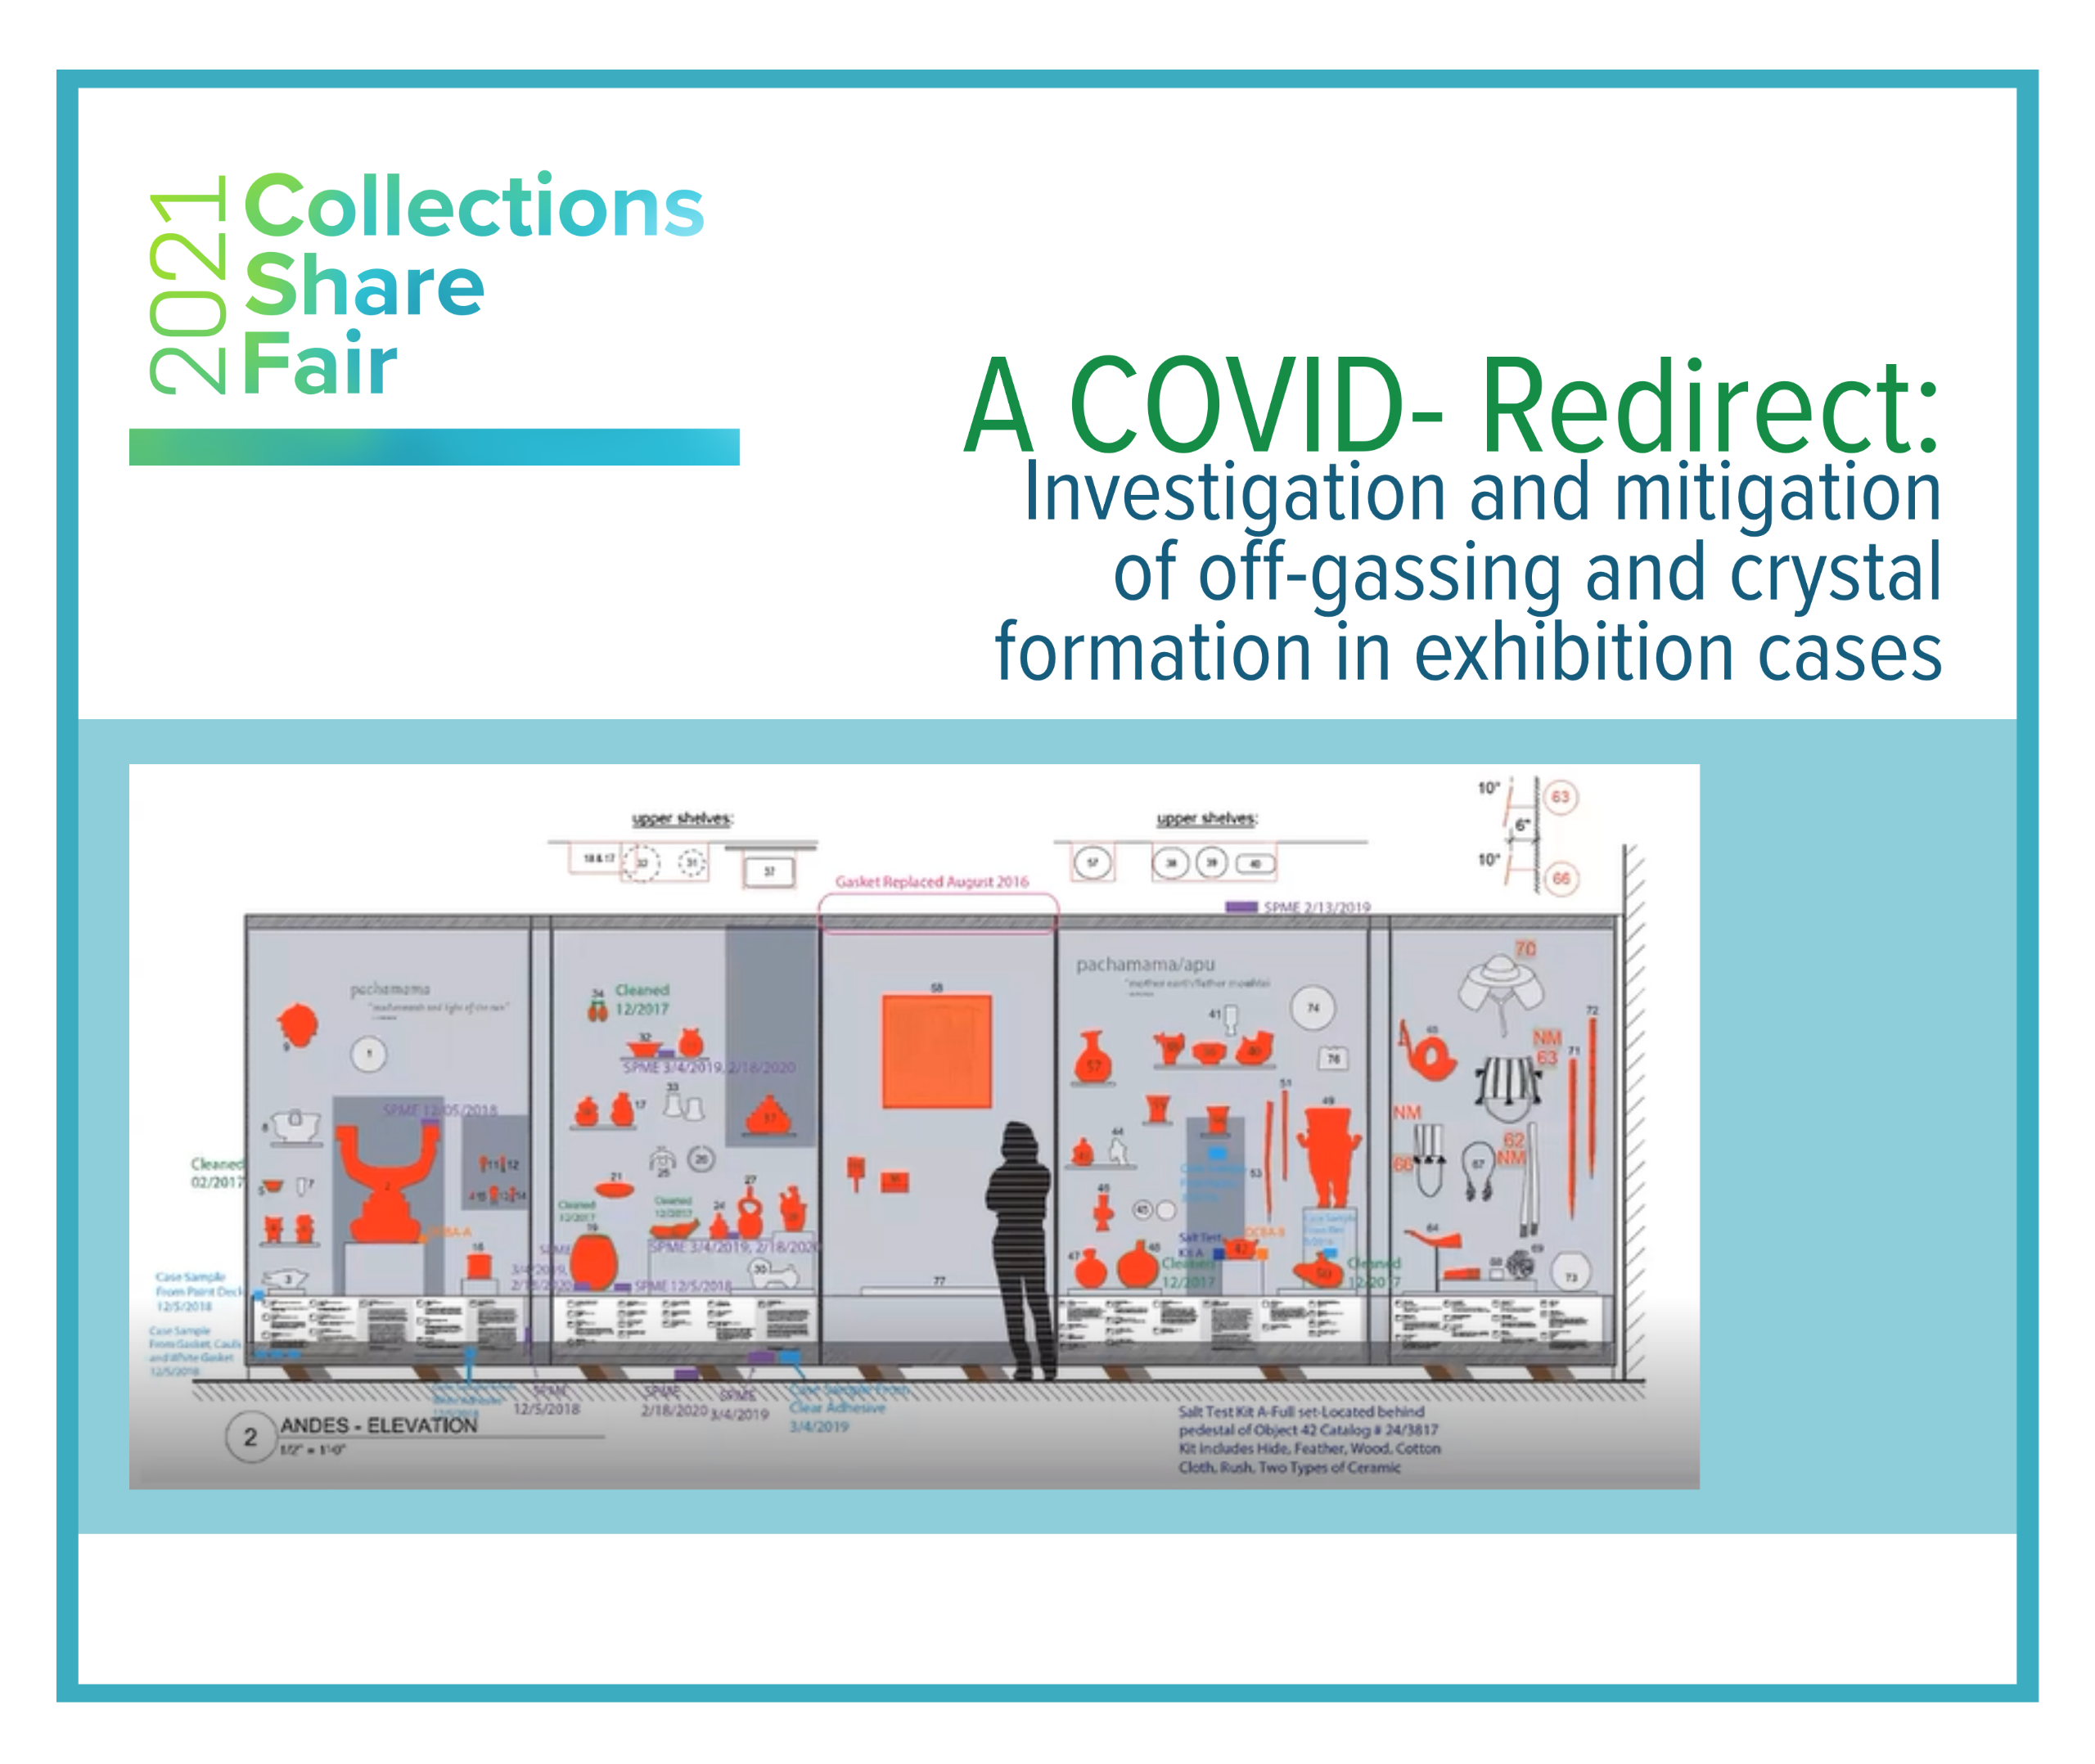 COVID Redirect: Investigation and Mitigation of Off-Gassing